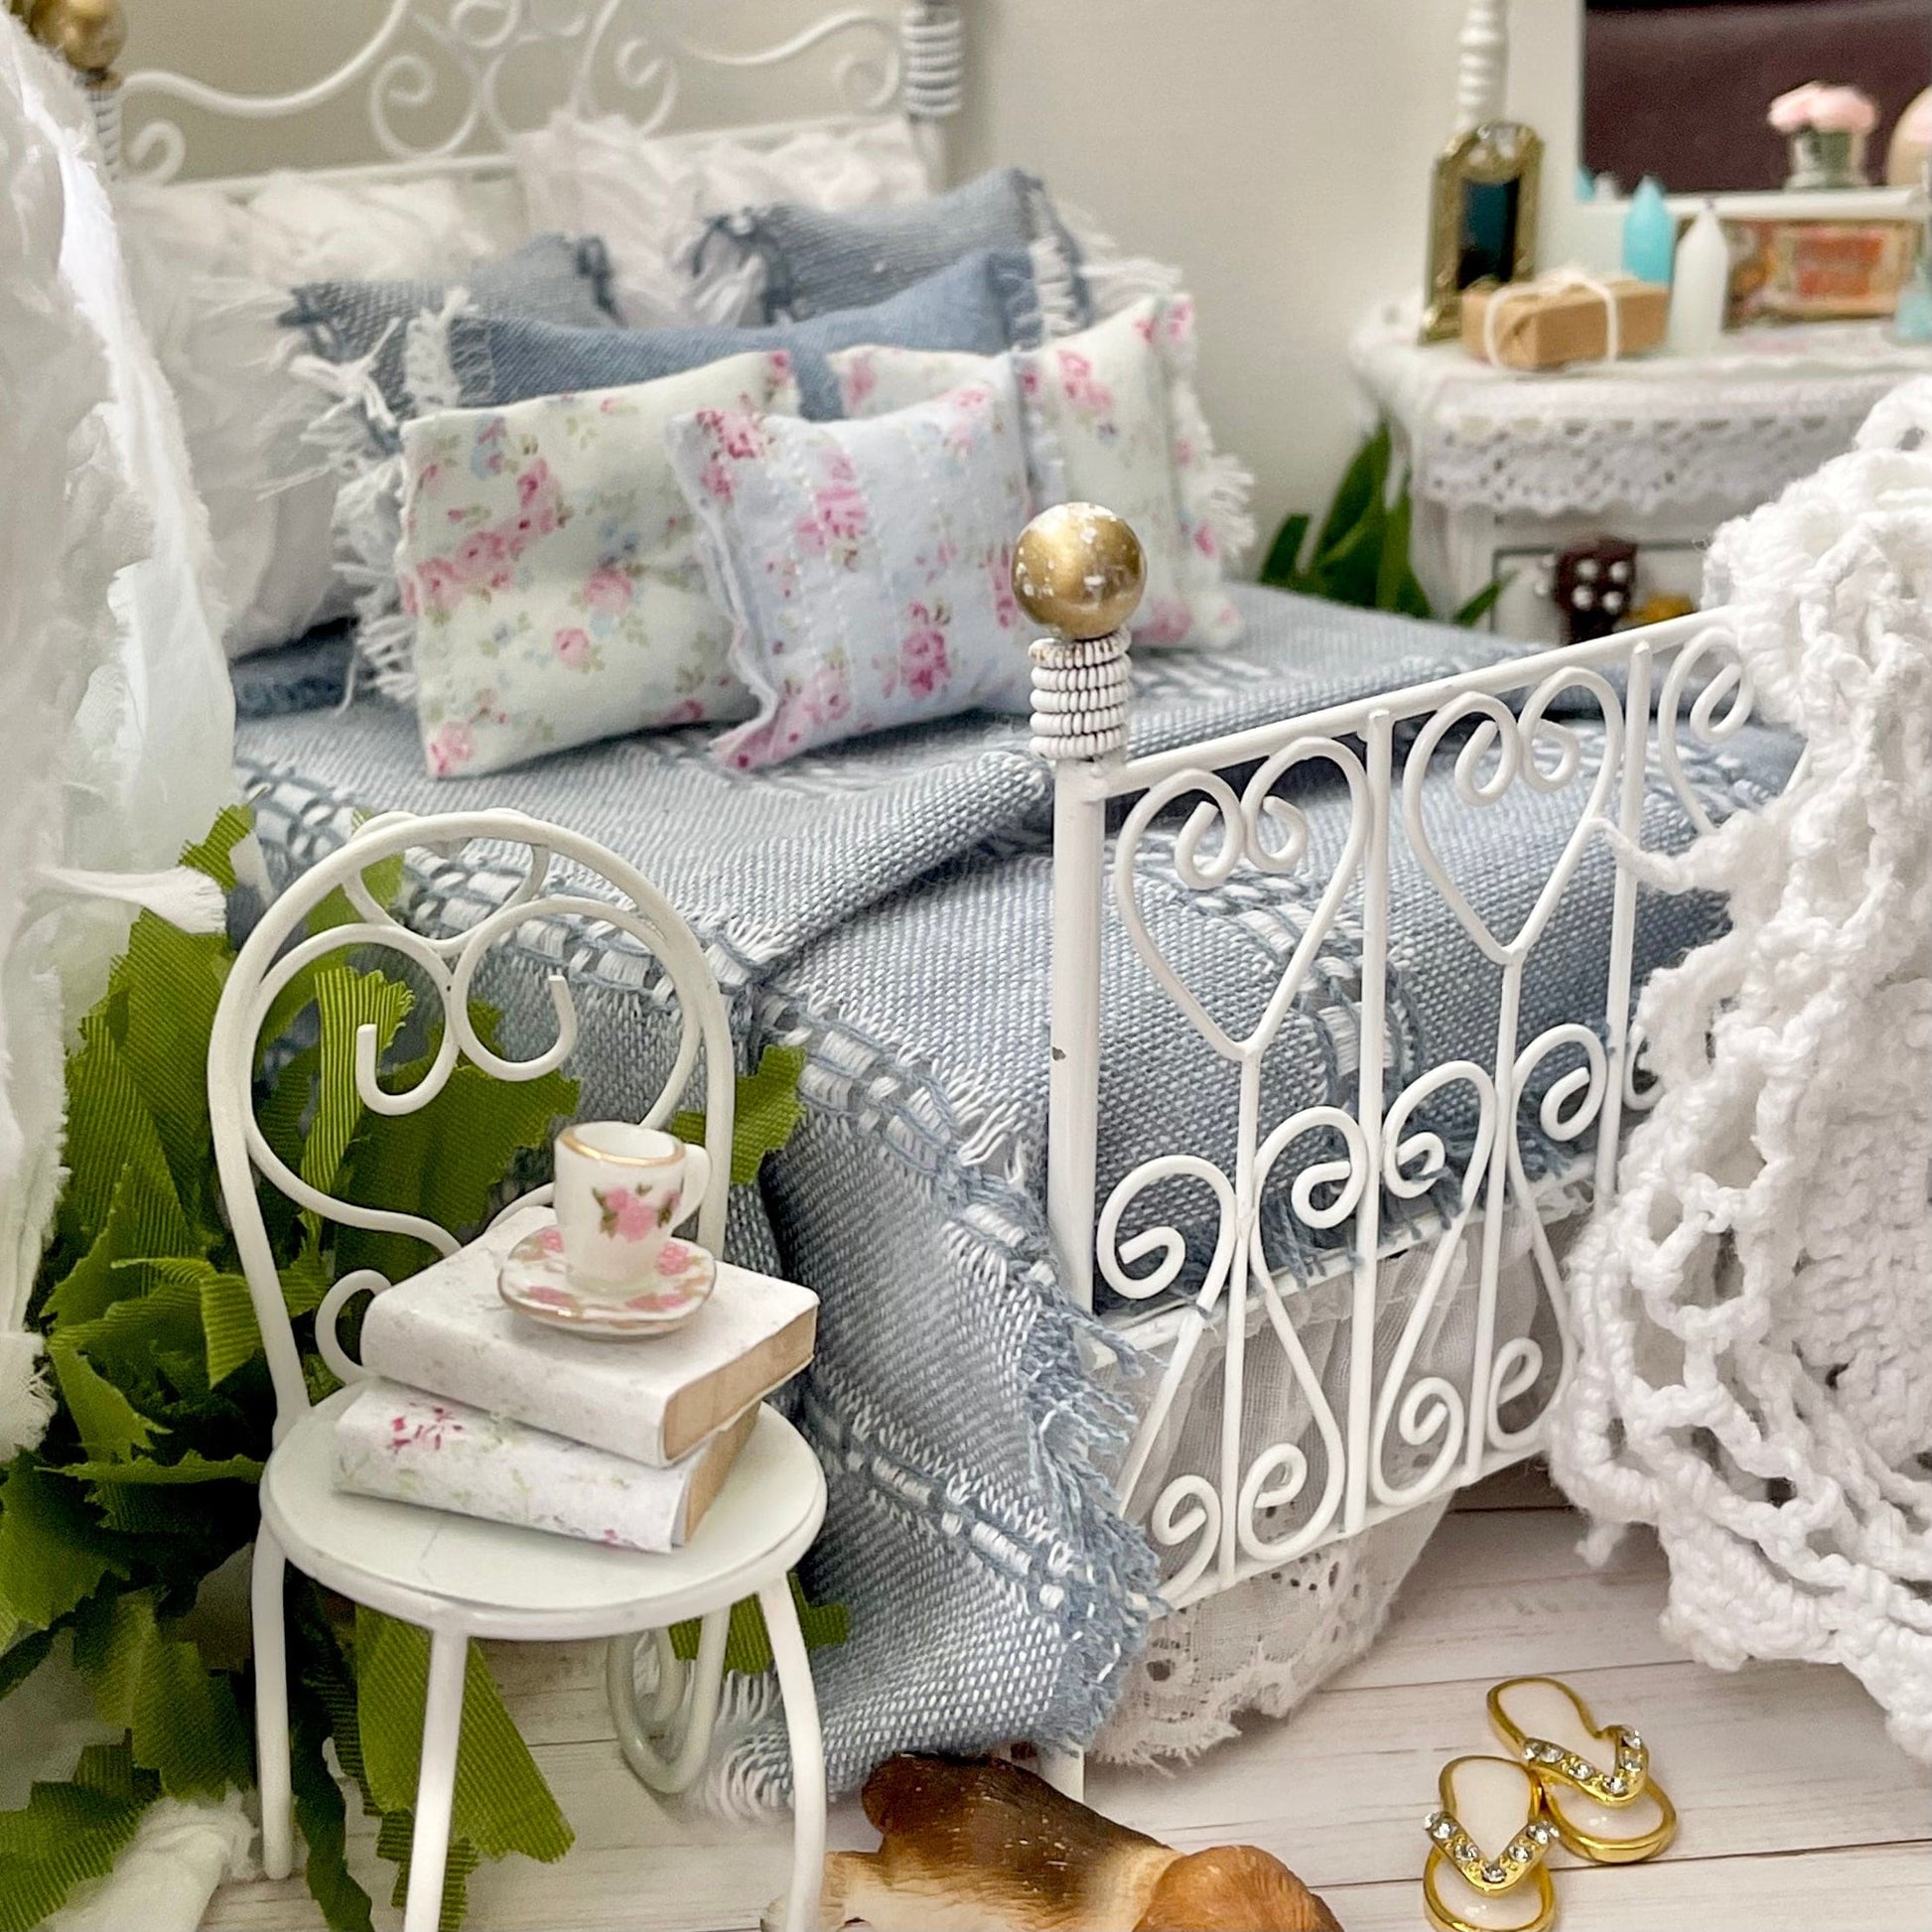 Chantallena Doll House Bedding Single Country Weekend - Raw Edged Blue Denim Single Bedding Set with Shabby Floral Pillows | Lillian Blue